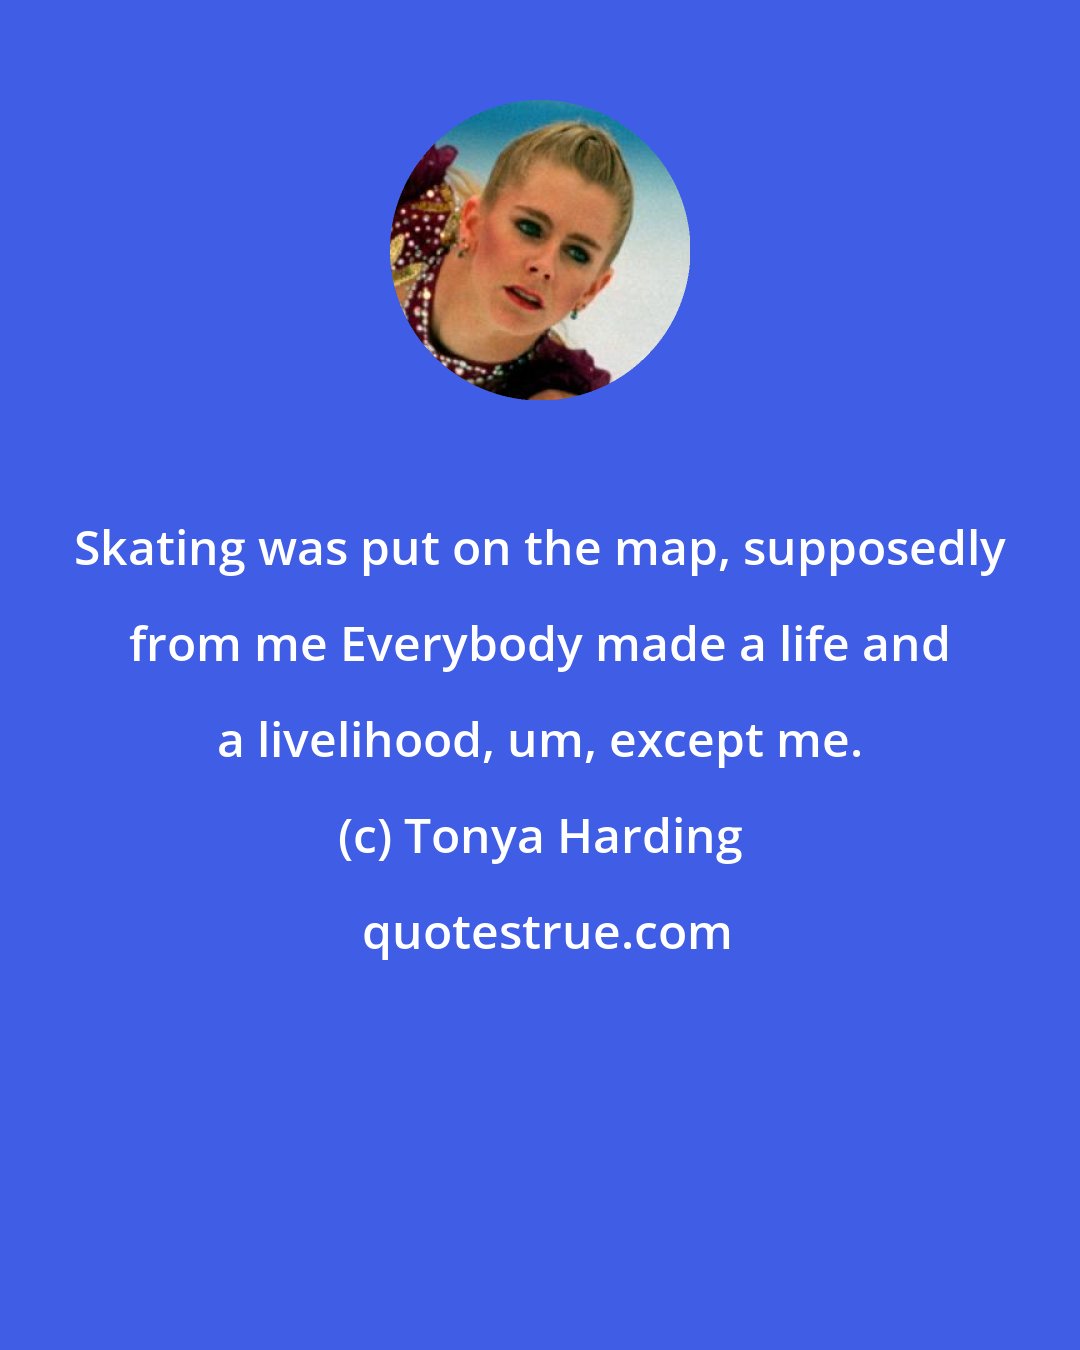 Tonya Harding: Skating was put on the map, supposedly from me Everybody made a life and a livelihood, um, except me.